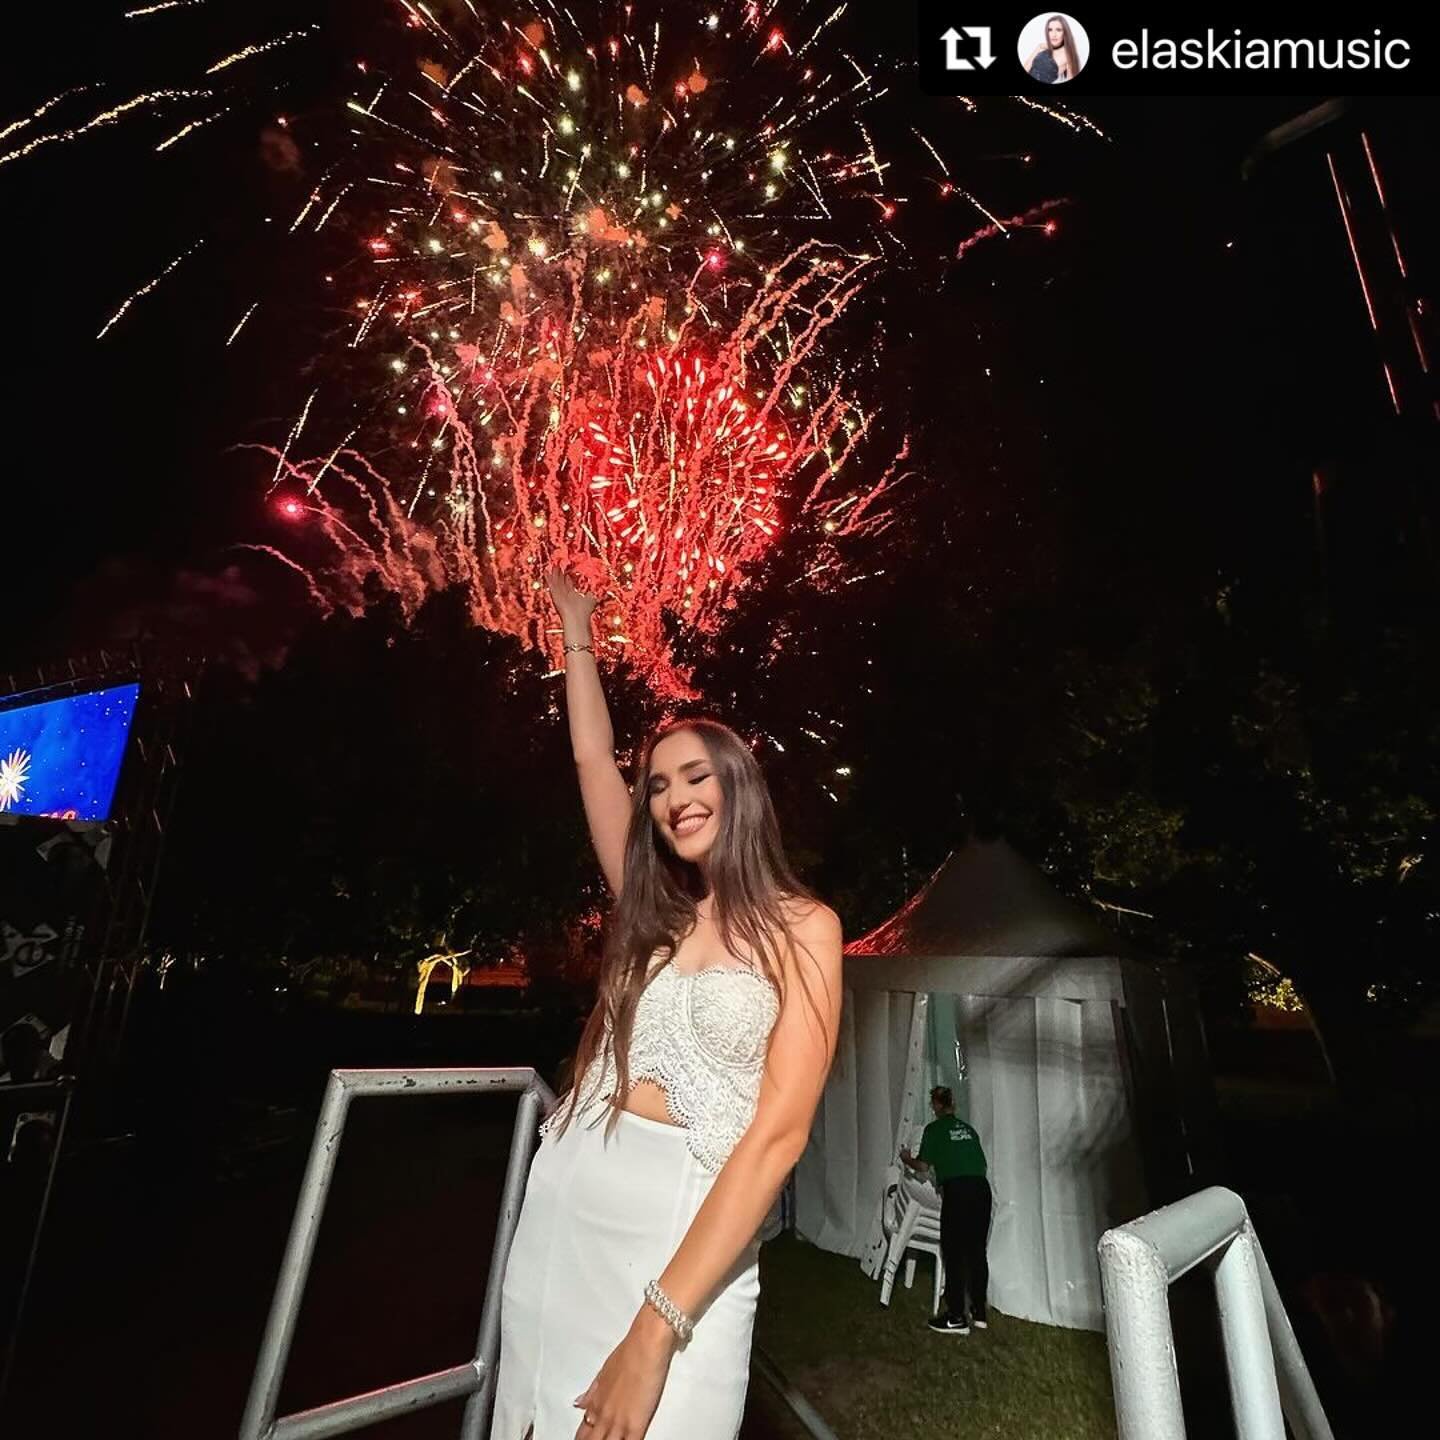 #Repost @elaskiamusic what AMAZING news!!! 💛
・・・
💥💥WE DID IT!!! 💥💥

Over 1 million streams on &lsquo;Calling out My Name&rsquo; 😭🤍

Thank you to every single person that has listened - I&rsquo;m beyond grateful to share my music with you.